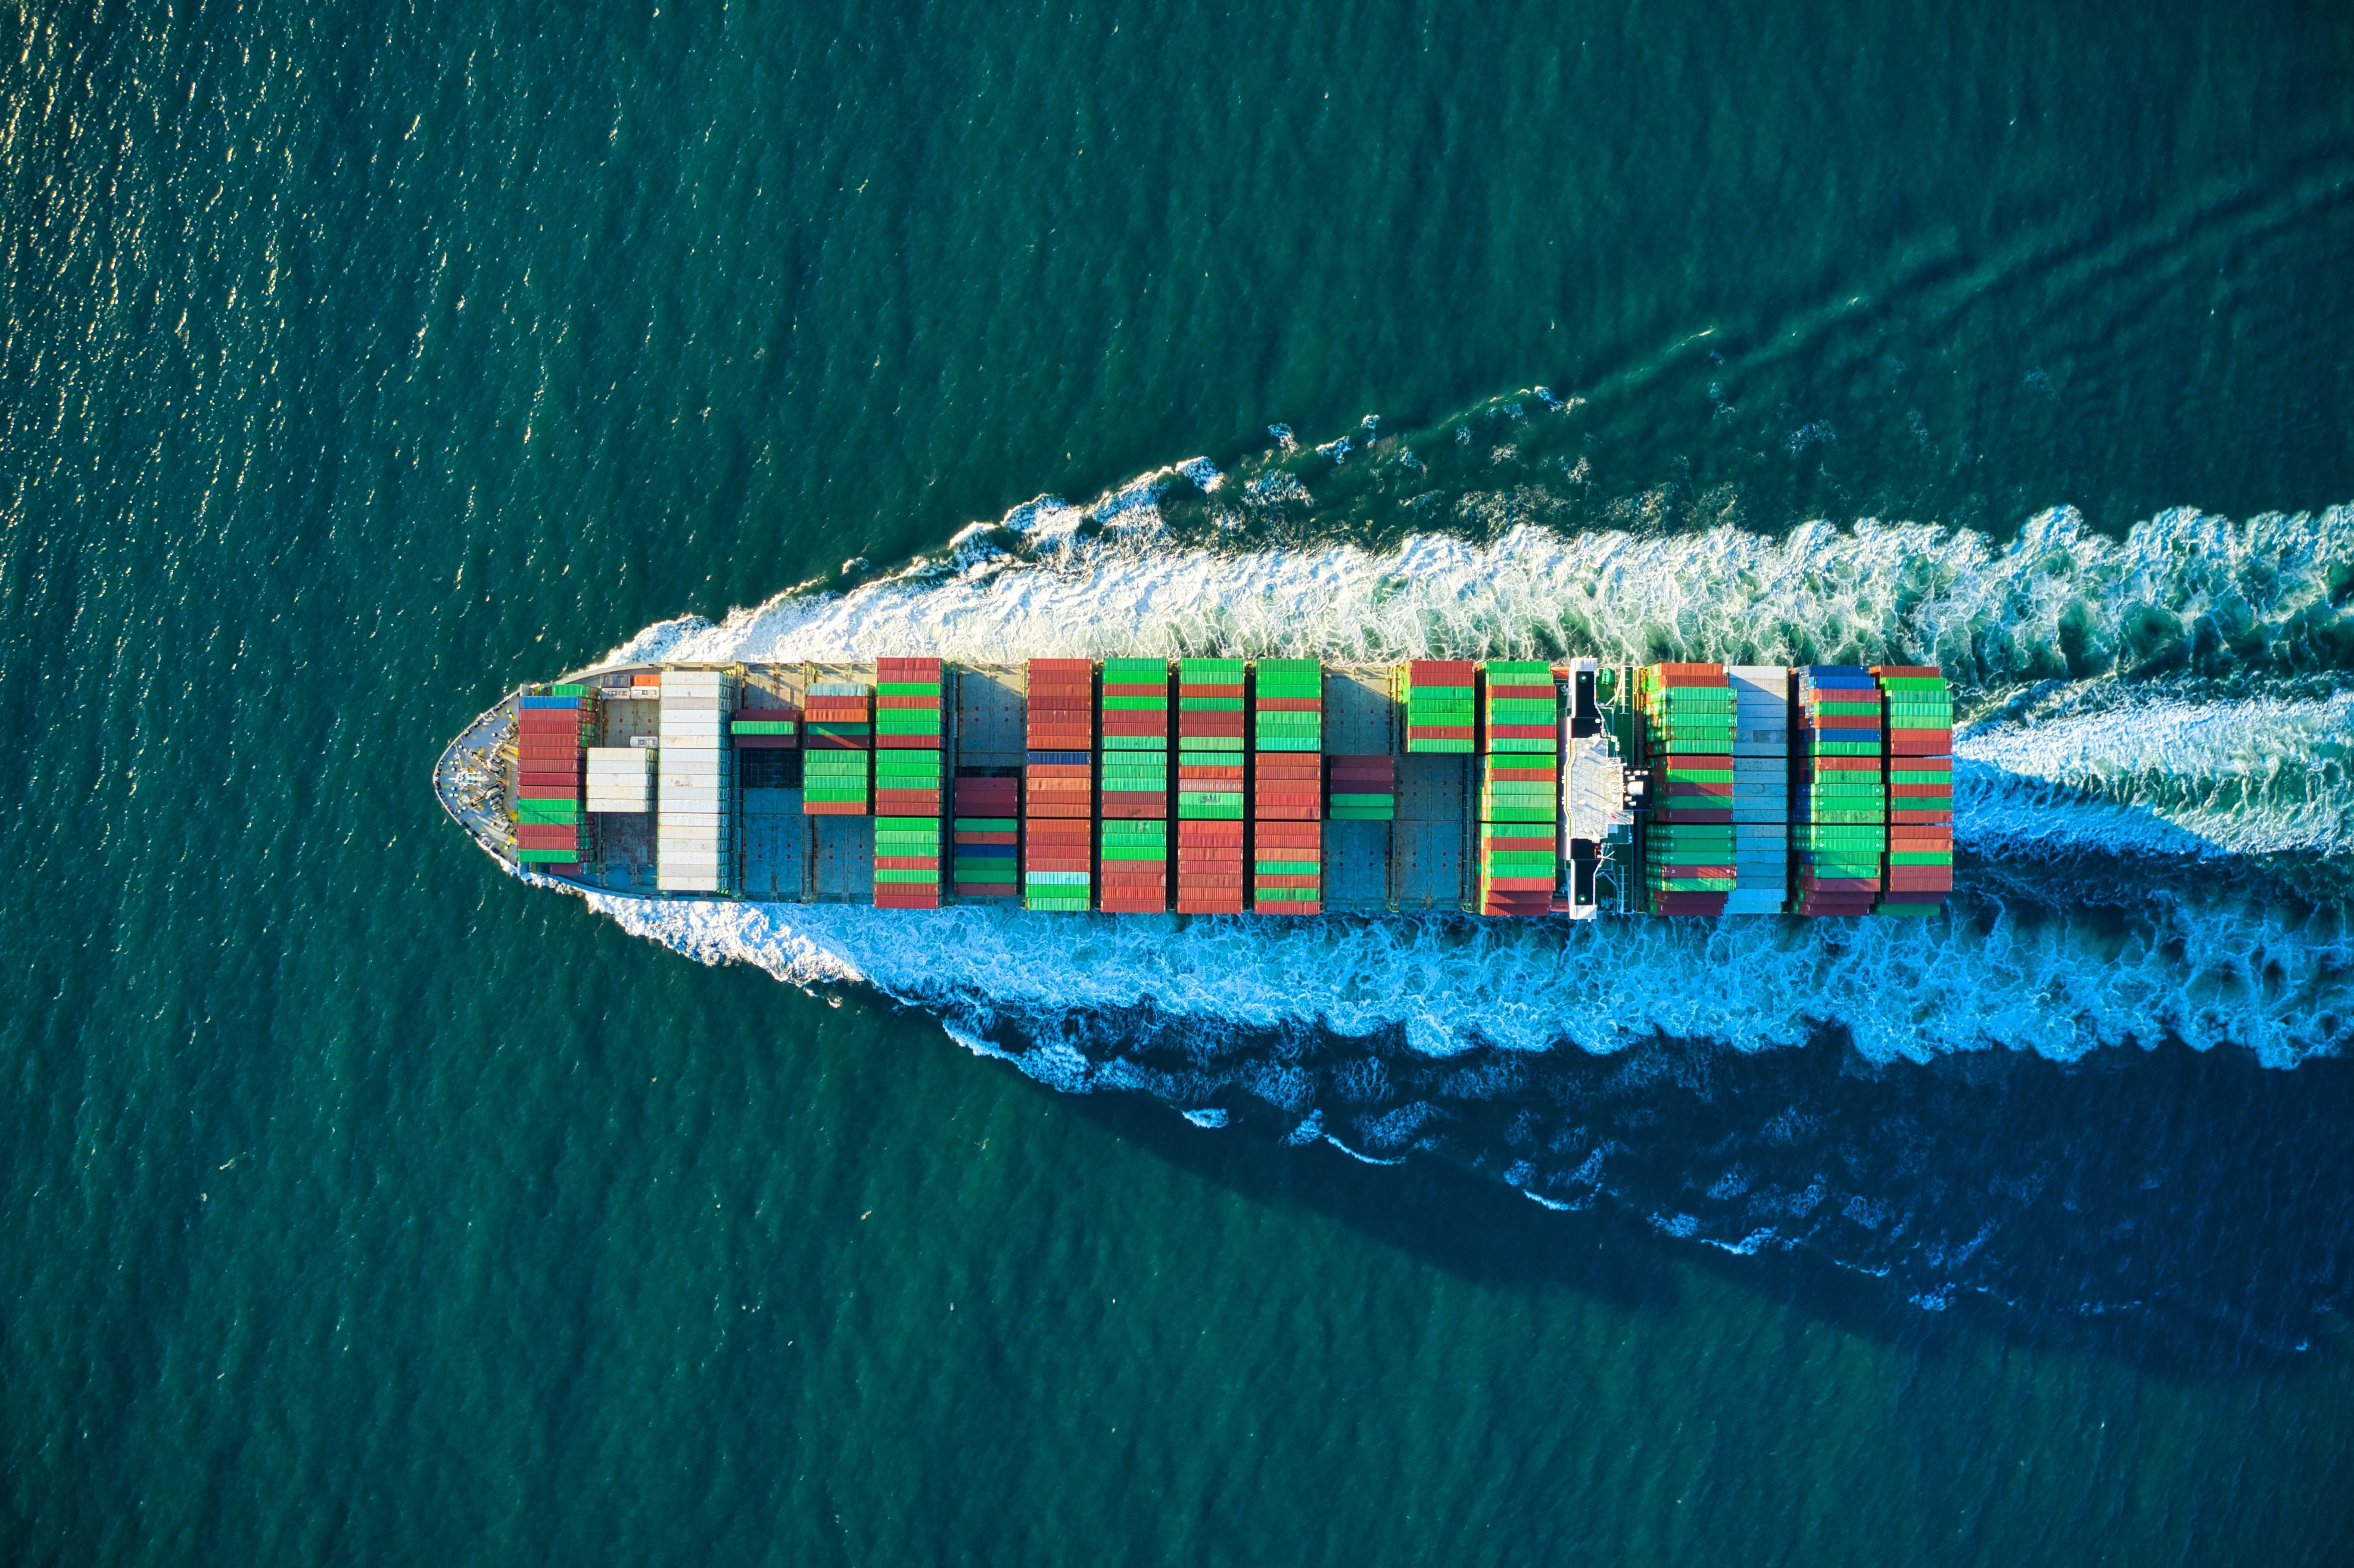 Aerial view of a cargo ship at sea, illustrating the time and distance saved when using the Middle Corridor for trade